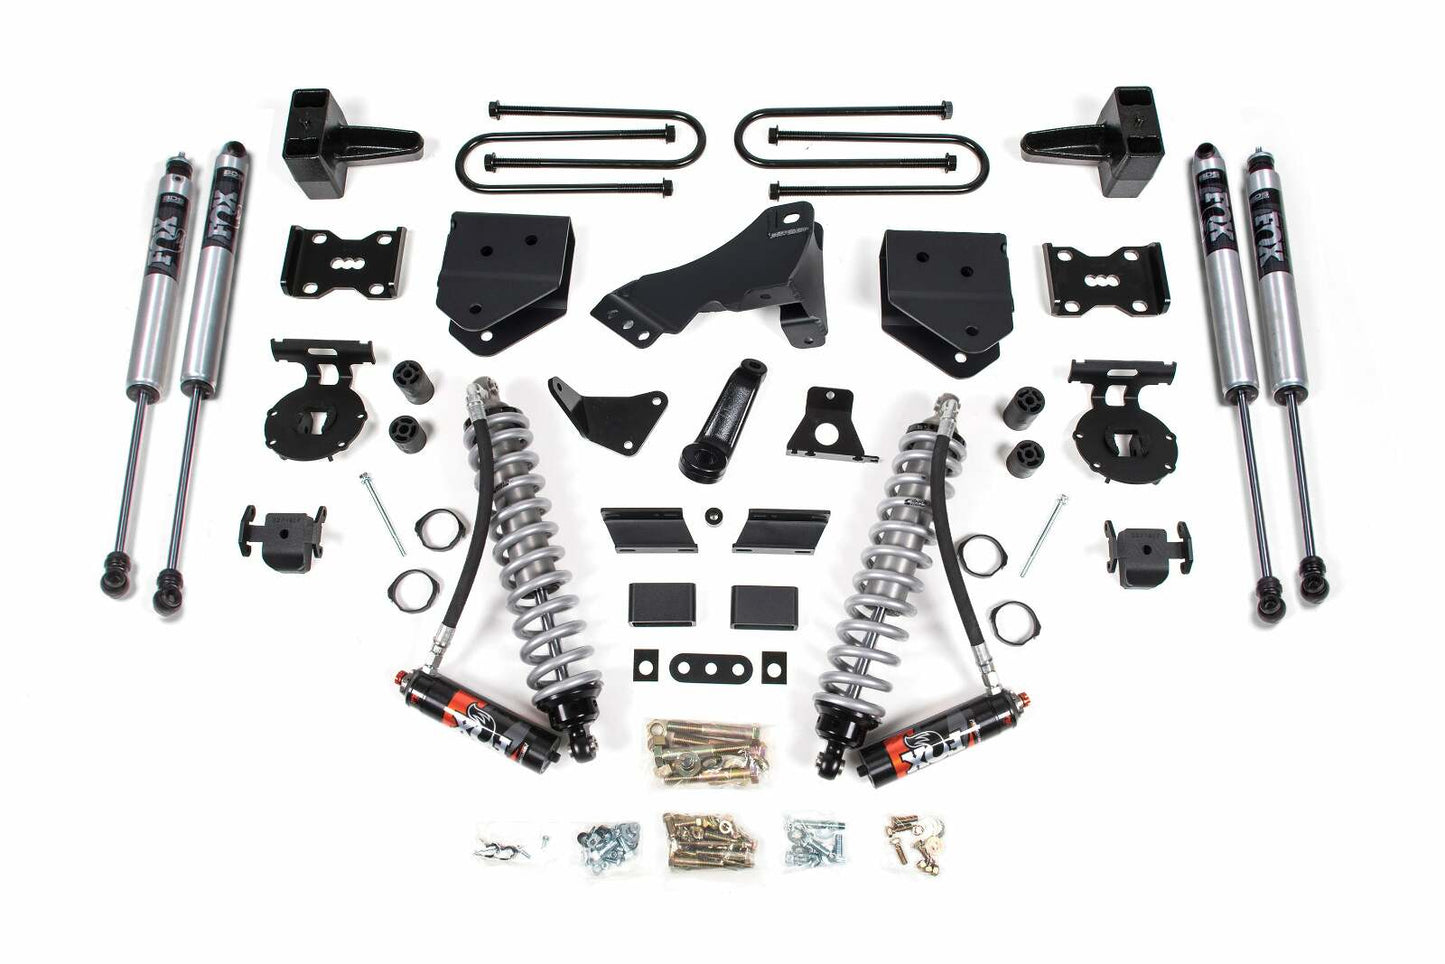 2011-2016 Ford F250/F350 4wd 4" Suspension Lift Kit, 3" Rear, Spring, Diesel - Fox 2.5 PES C/O Front, Fox 2.0 IFP PS Aux Front, Fox 2.0 IFP PS Rear